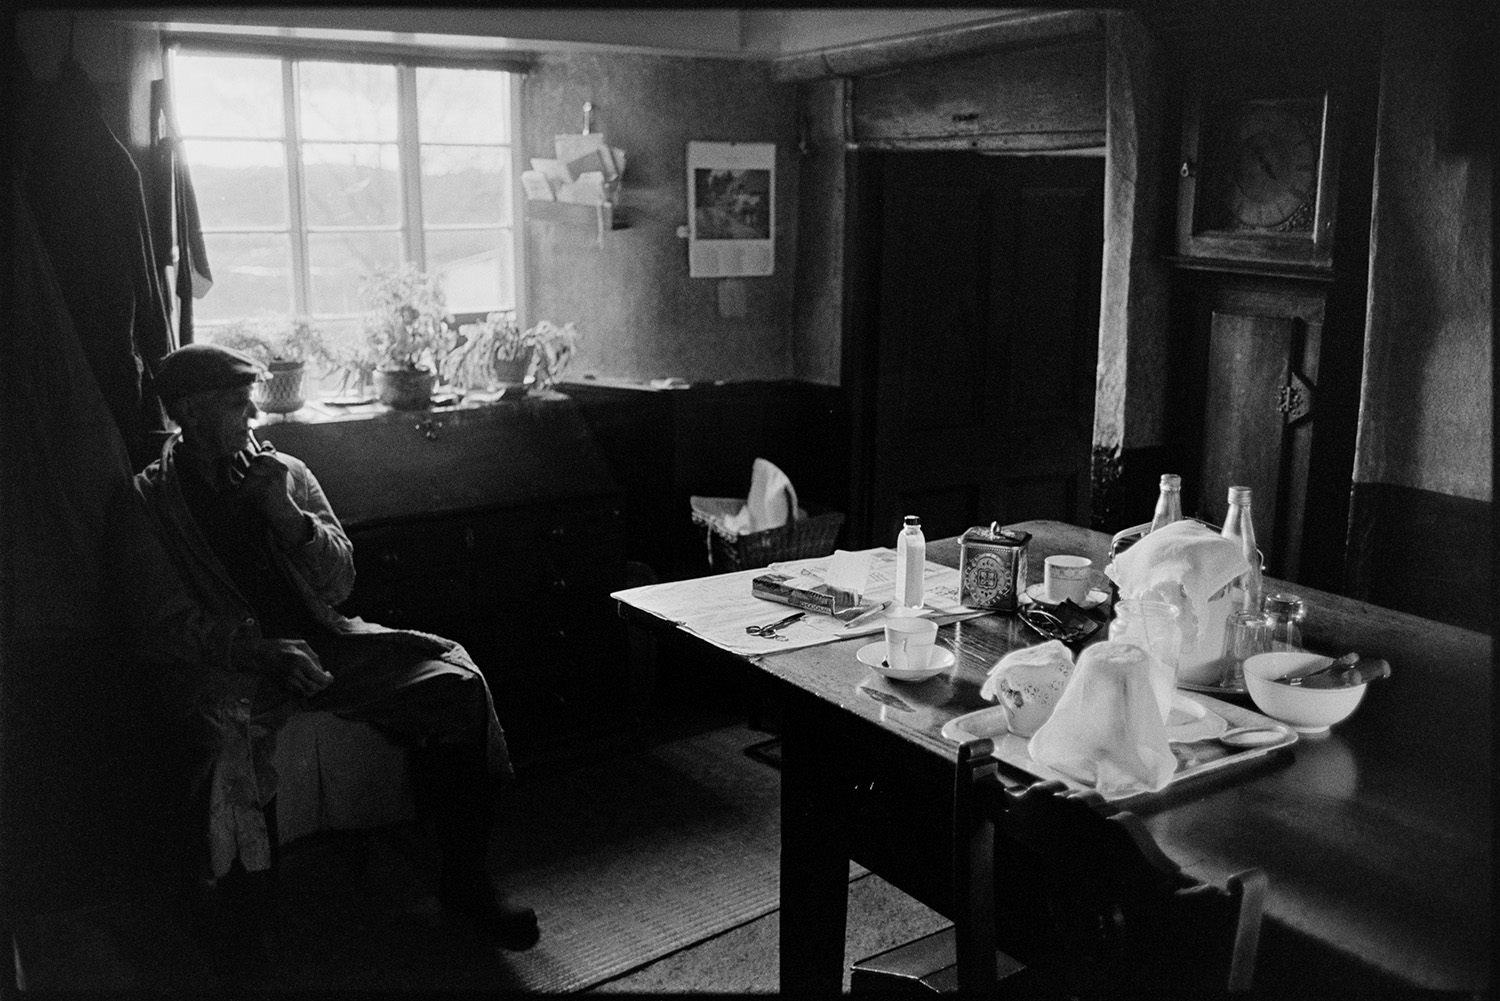 Farmhouse kitchen with tea on table. 
[Reg Chamings sat in the kitchen of Bridgetown farmhouse. The table has cups, a teapot, newspaper and pair of scissors on it. A grandfather clock can be seen in the background and the window sill has various pot plants.]